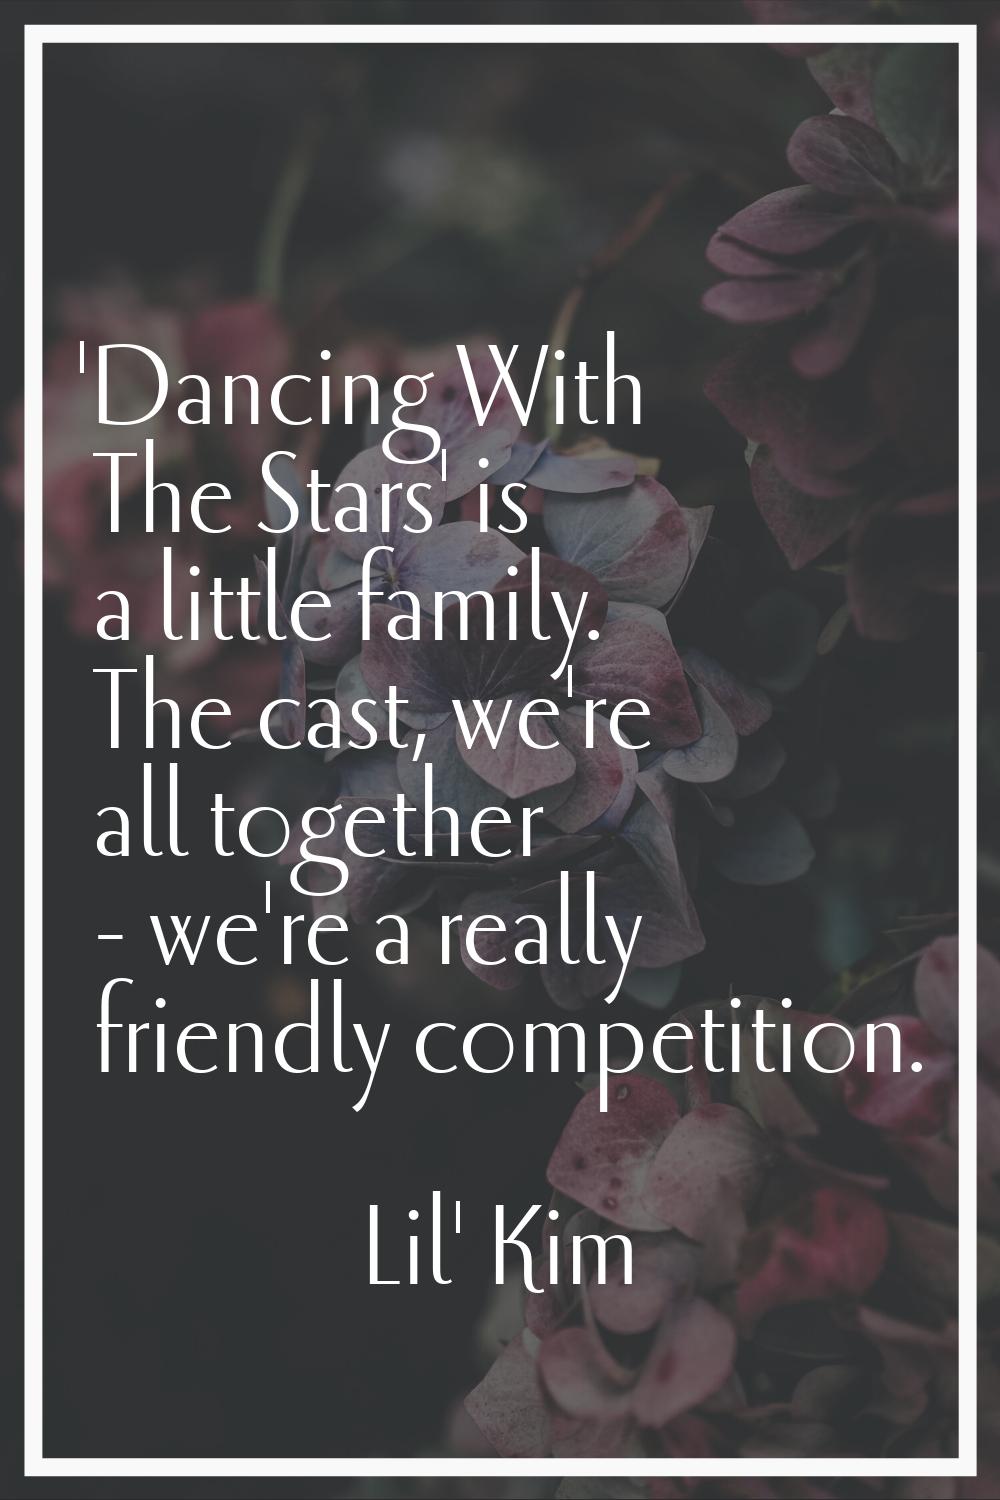 'Dancing With The Stars' is a little family. The cast, we're all together - we're a really friendly